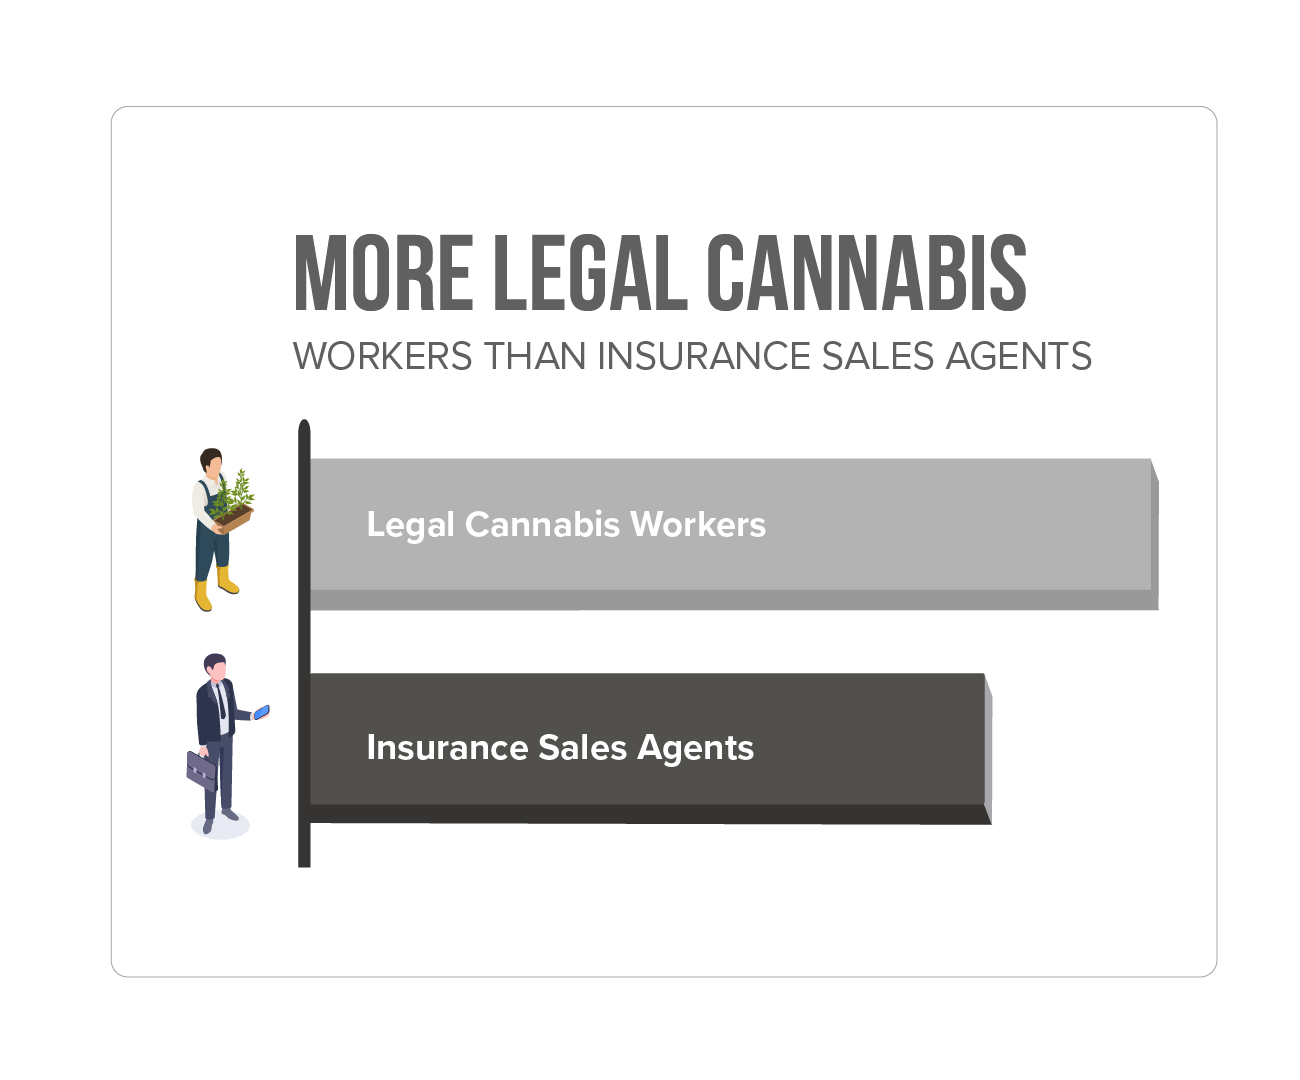 More Legal Cannabis Workers than insurance sales agents